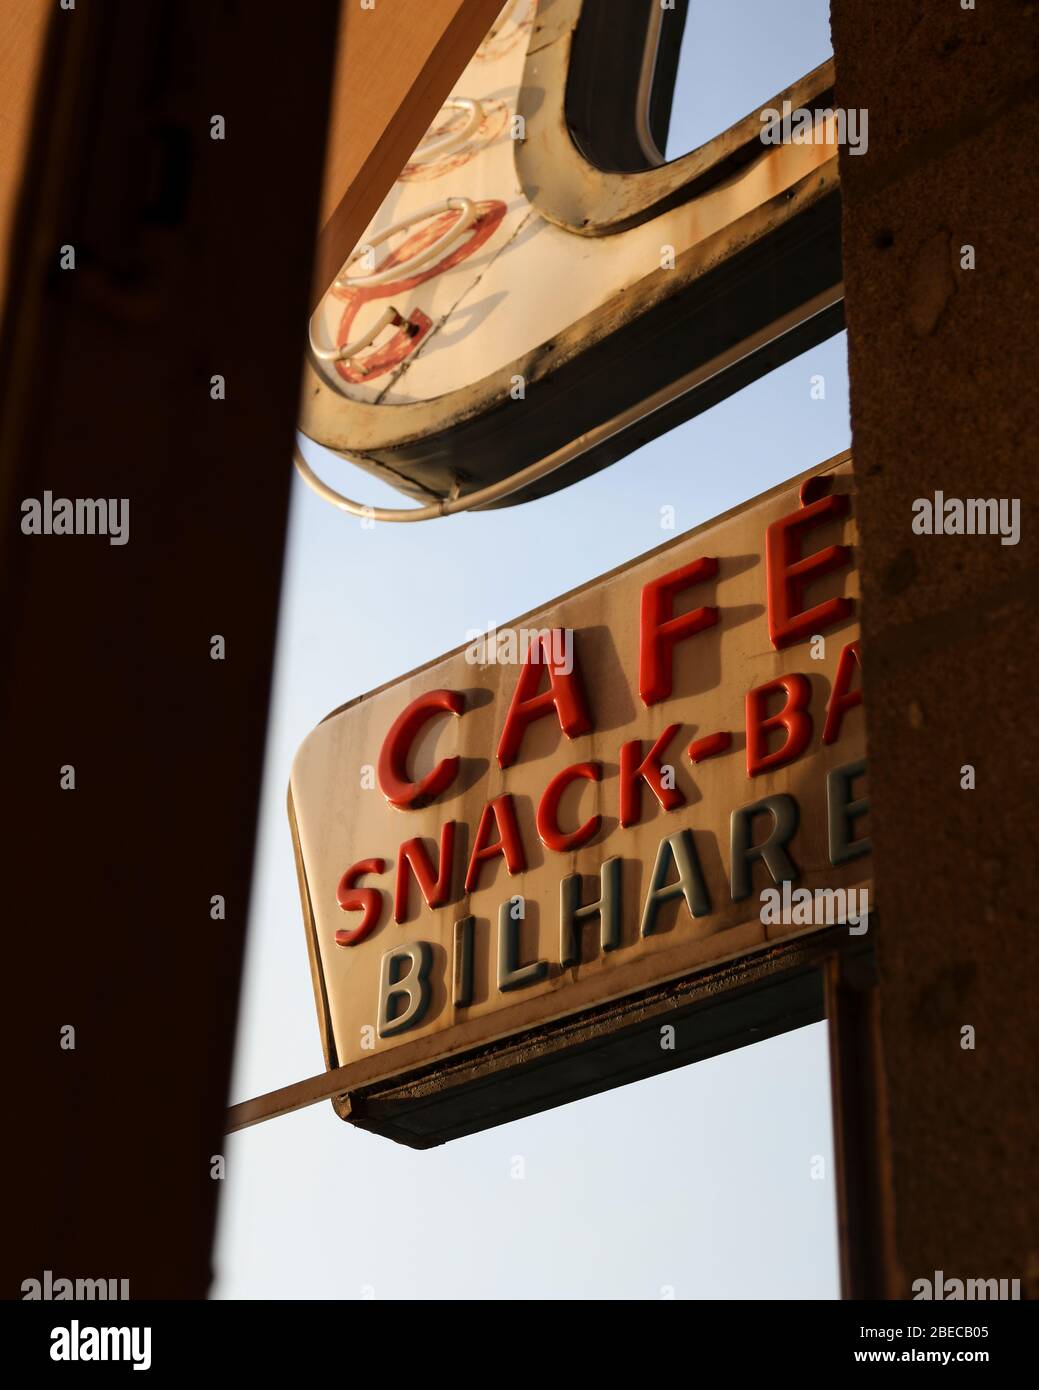 An obscured view of a retro sign for a Cafe, Snack Bar, in Guimarães, northern Portugal. Stock Photo